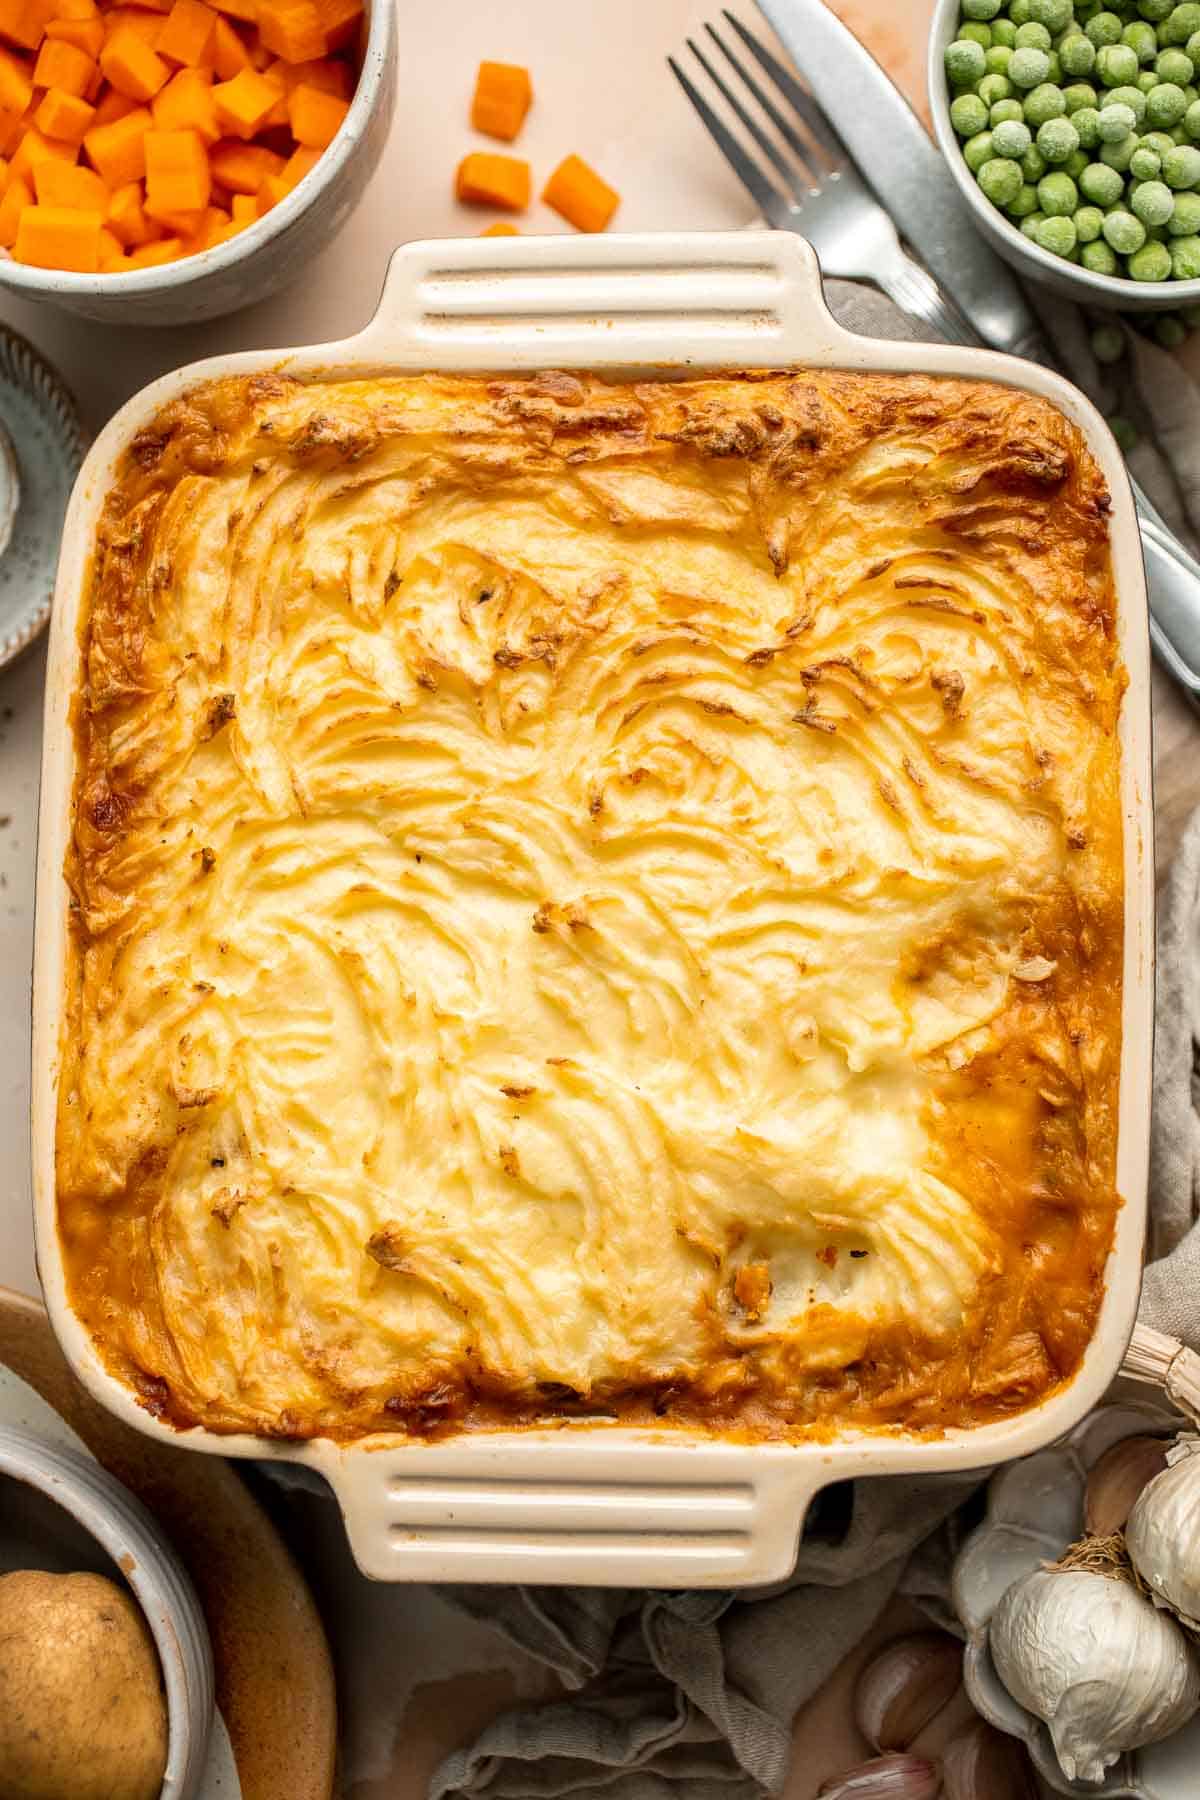 Ditch the ground lamb and enjoy this cozy Vegetarian Shepherd's Pie that uses a blend of perfectly seasoned mushrooms and lentils instead. | aheadofthyme.com